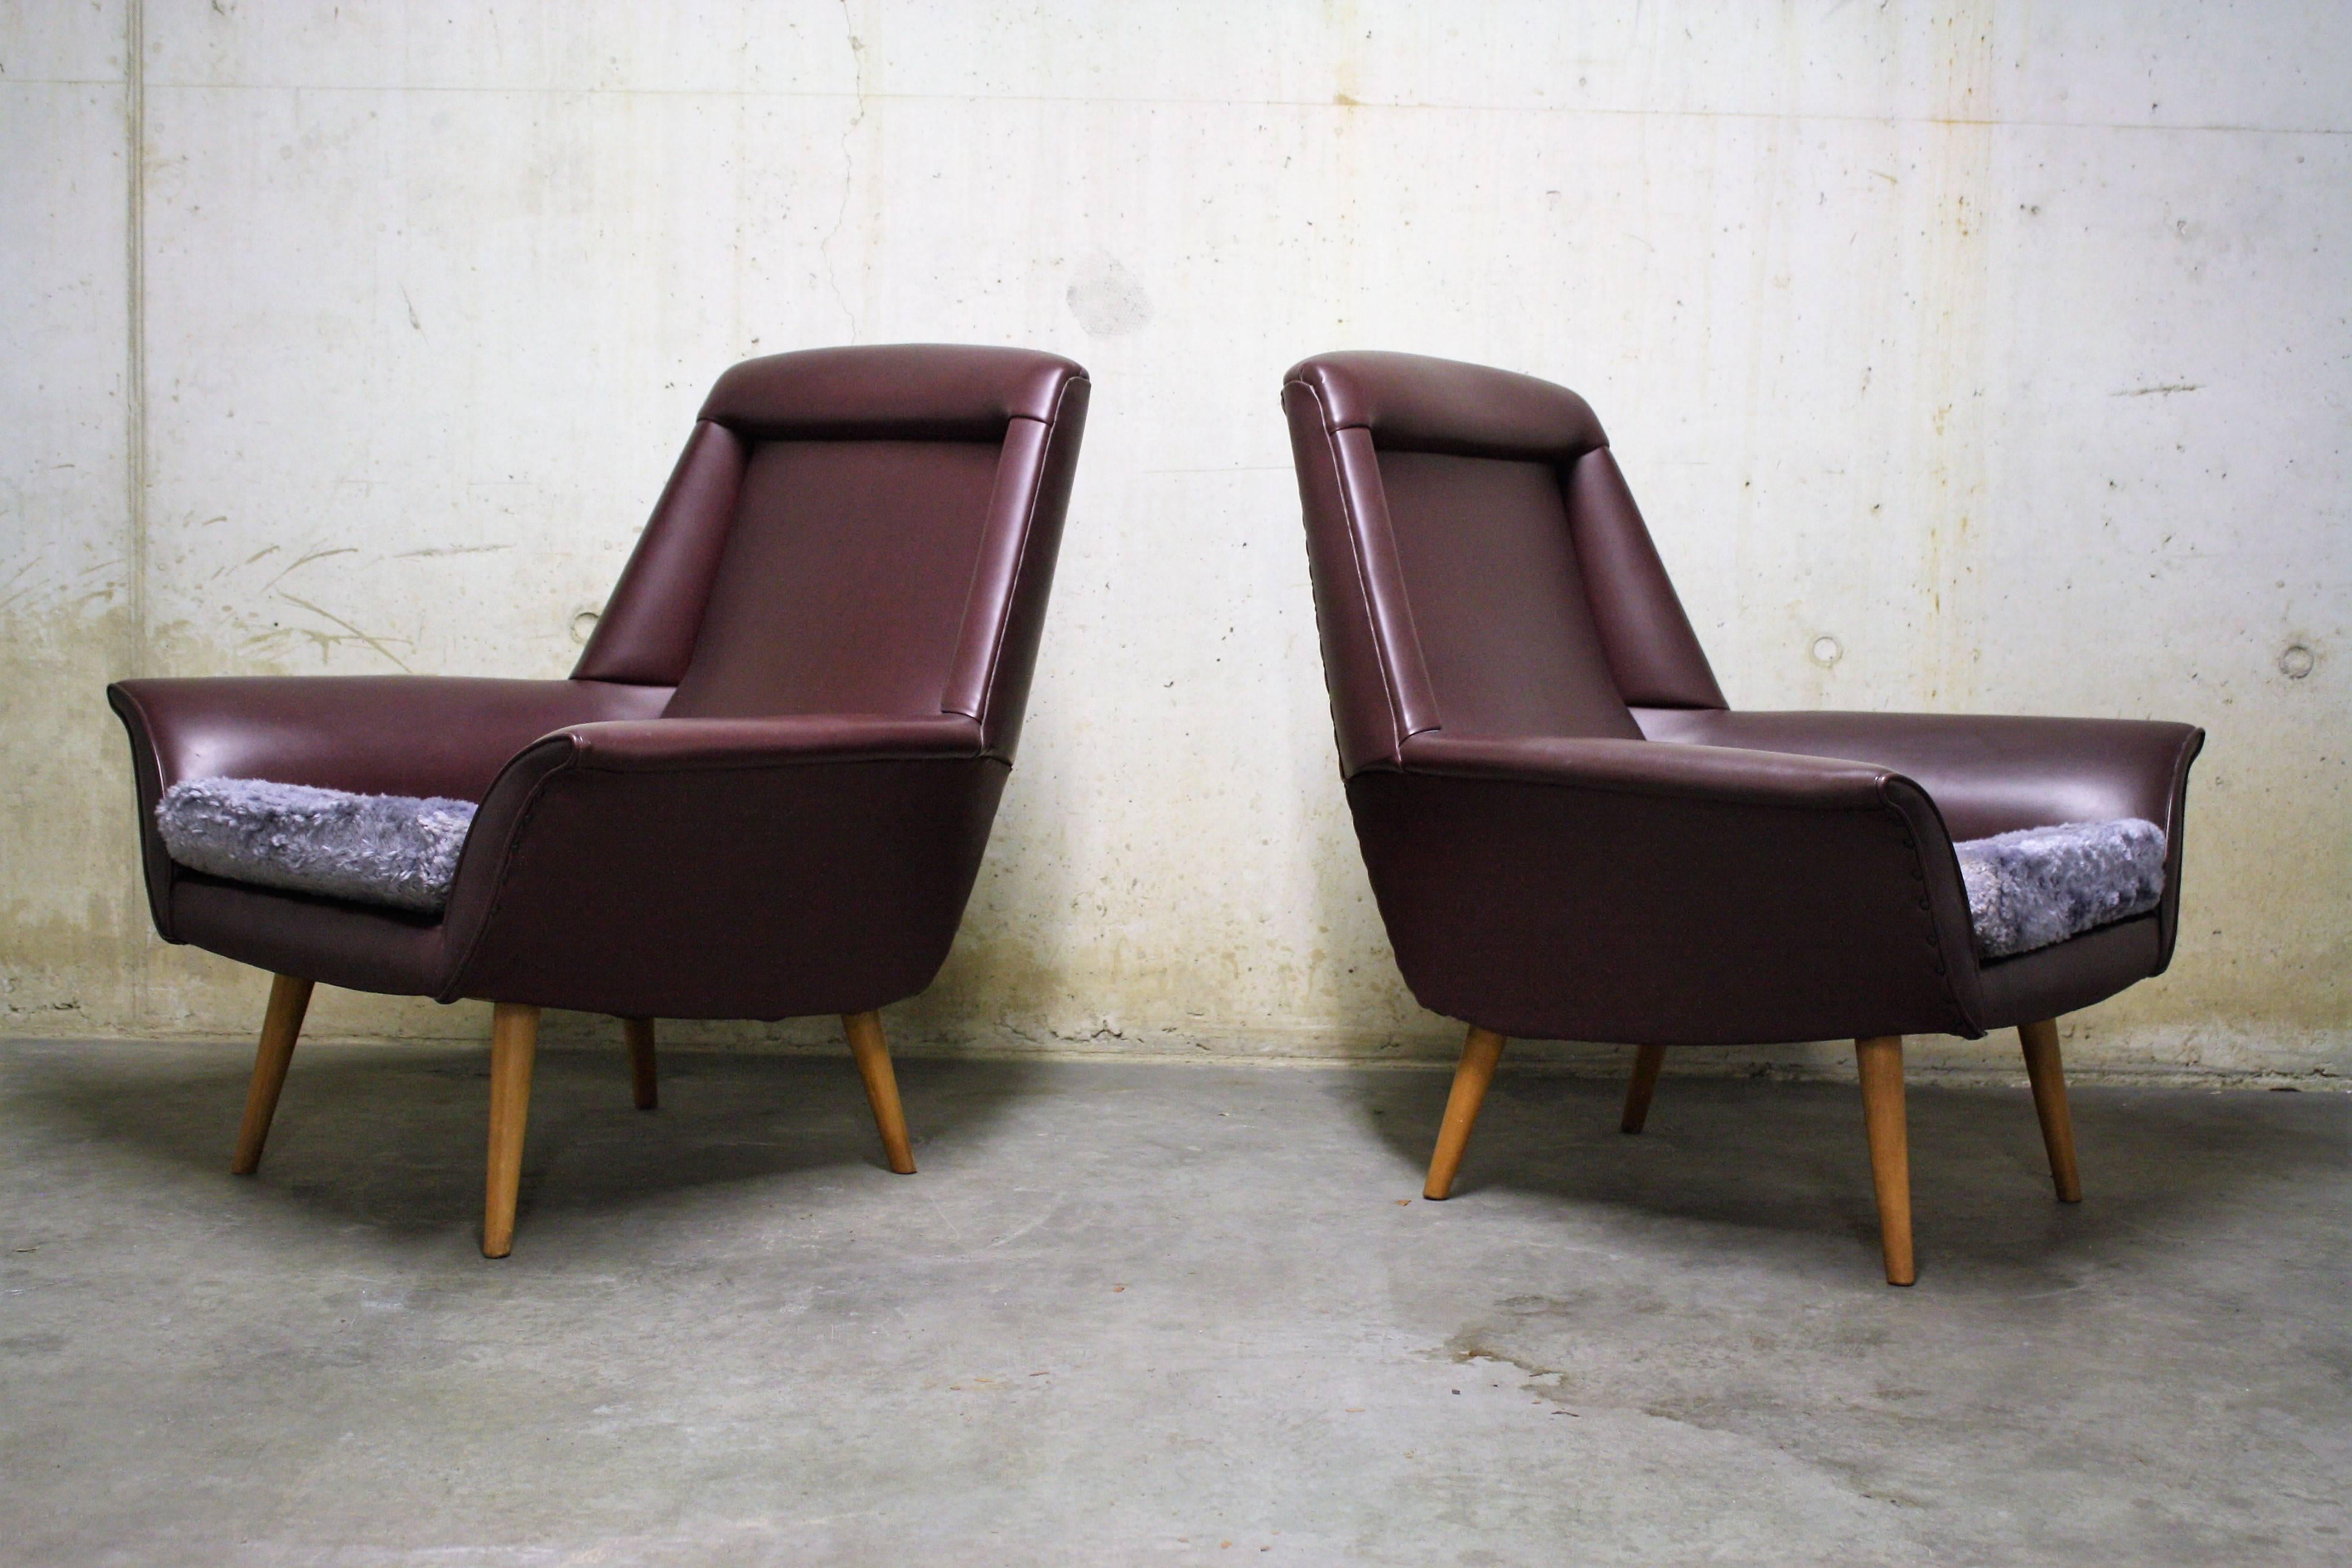 A pair of purple cocktail chairs made from skai. The cushions are not original and can be changed to something more 'civilized'.

These chairs are in a good condition and seat well.

The wooden legs combined with the bended armrests make the